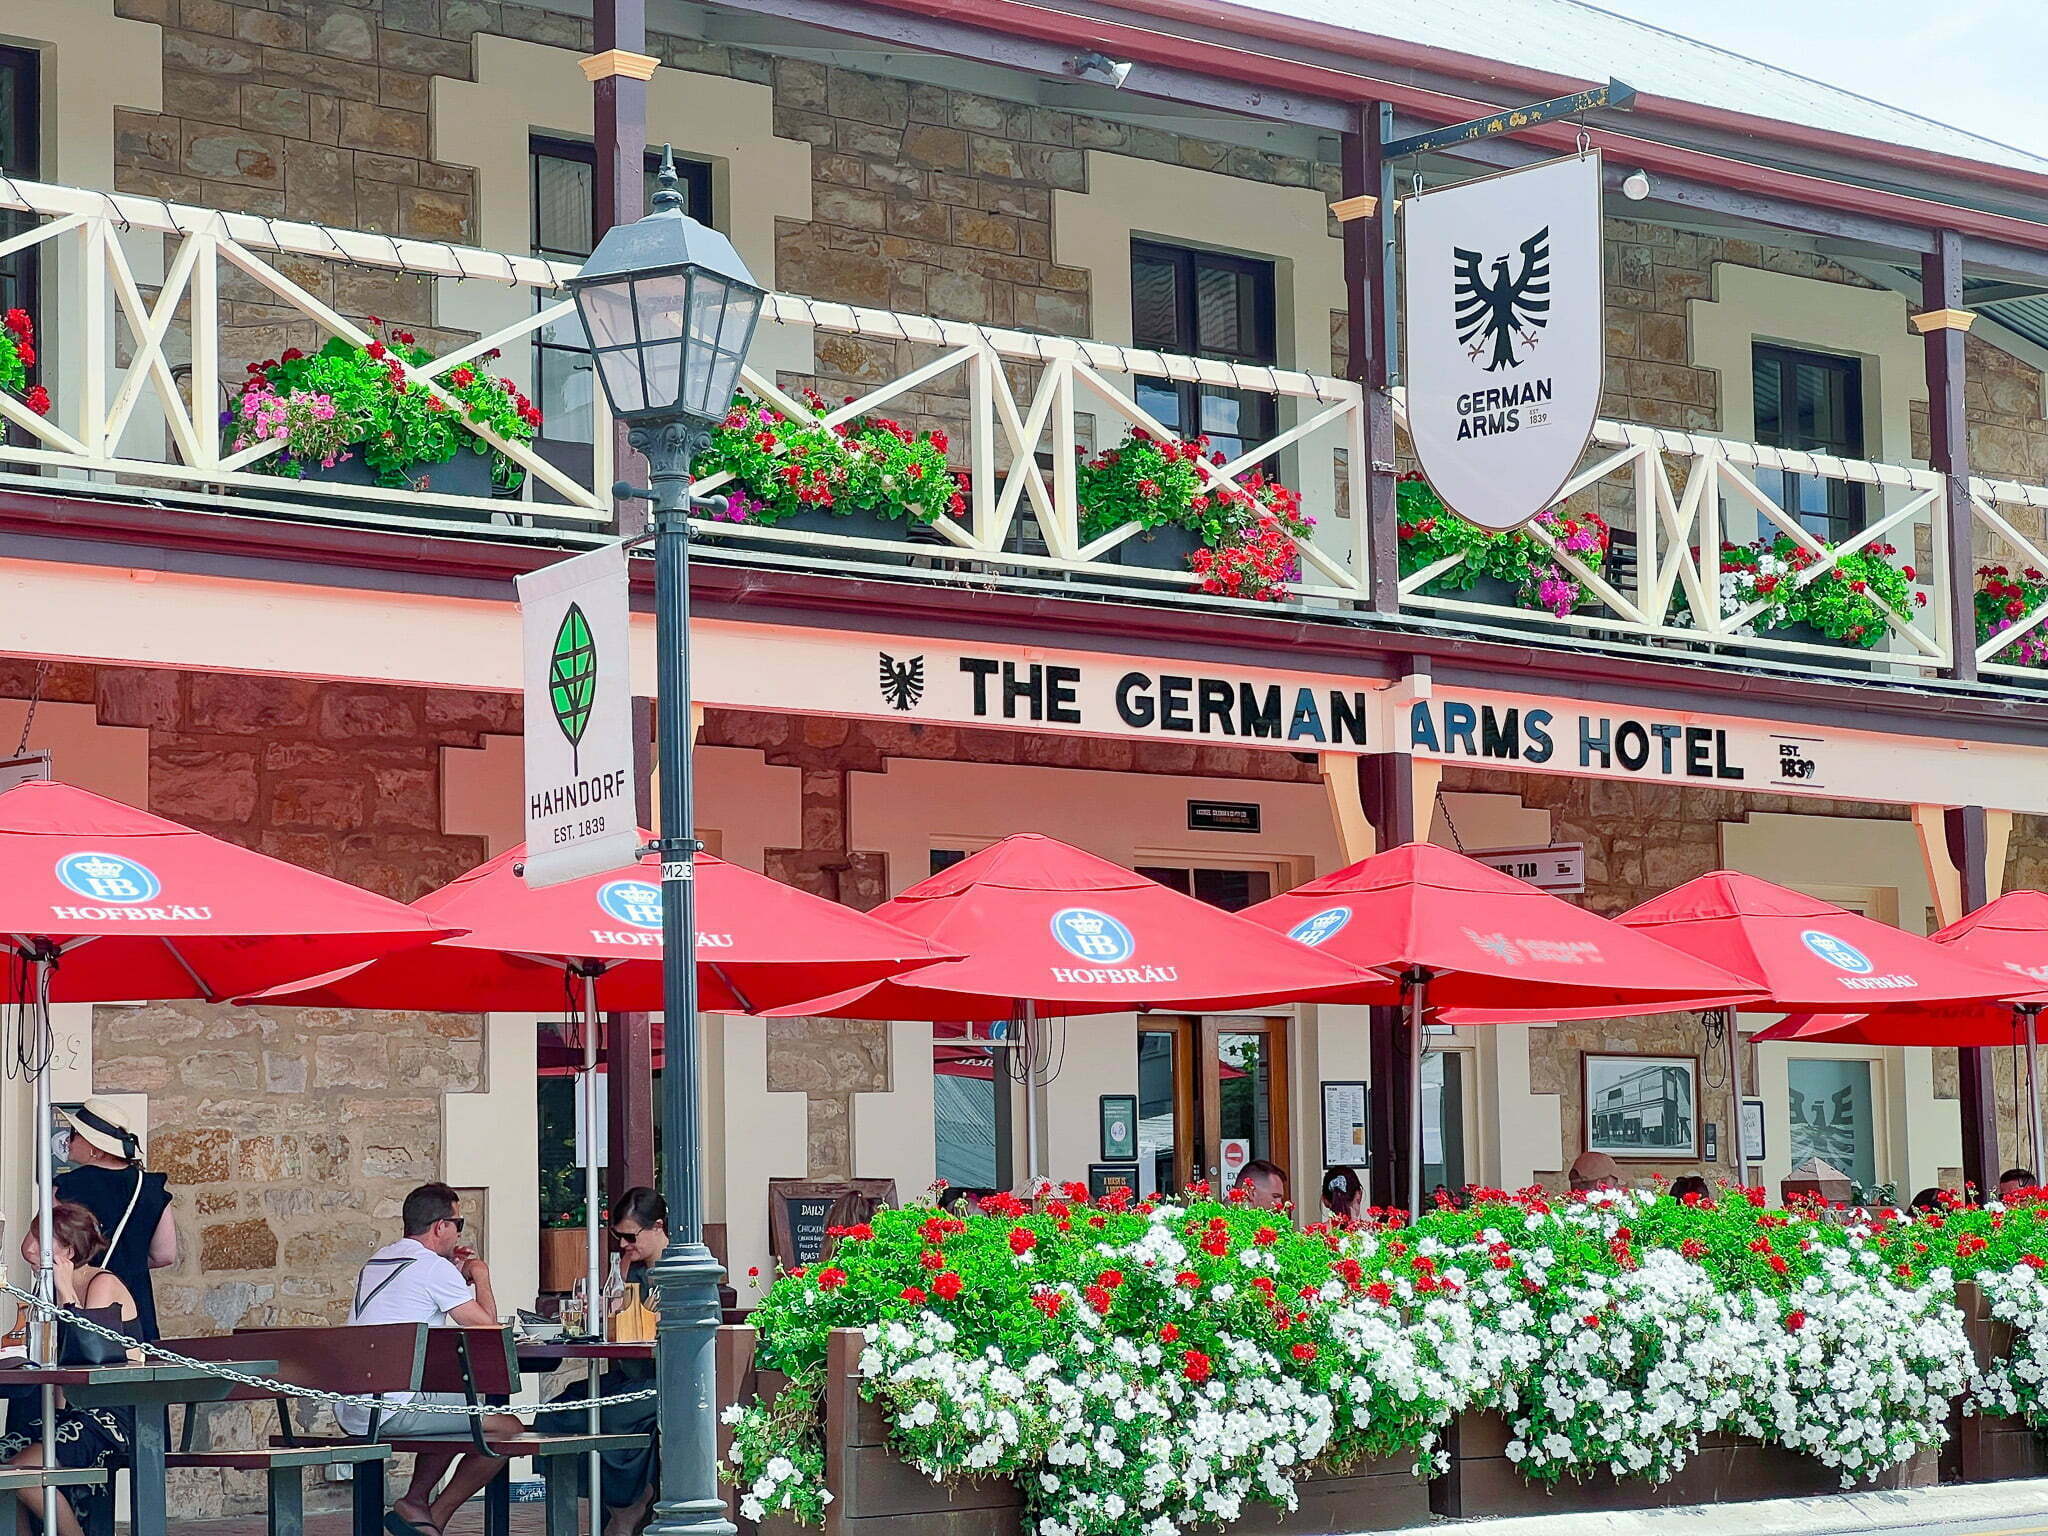 An European looking pub with a sign out the front saying "The German Arms Hotel"